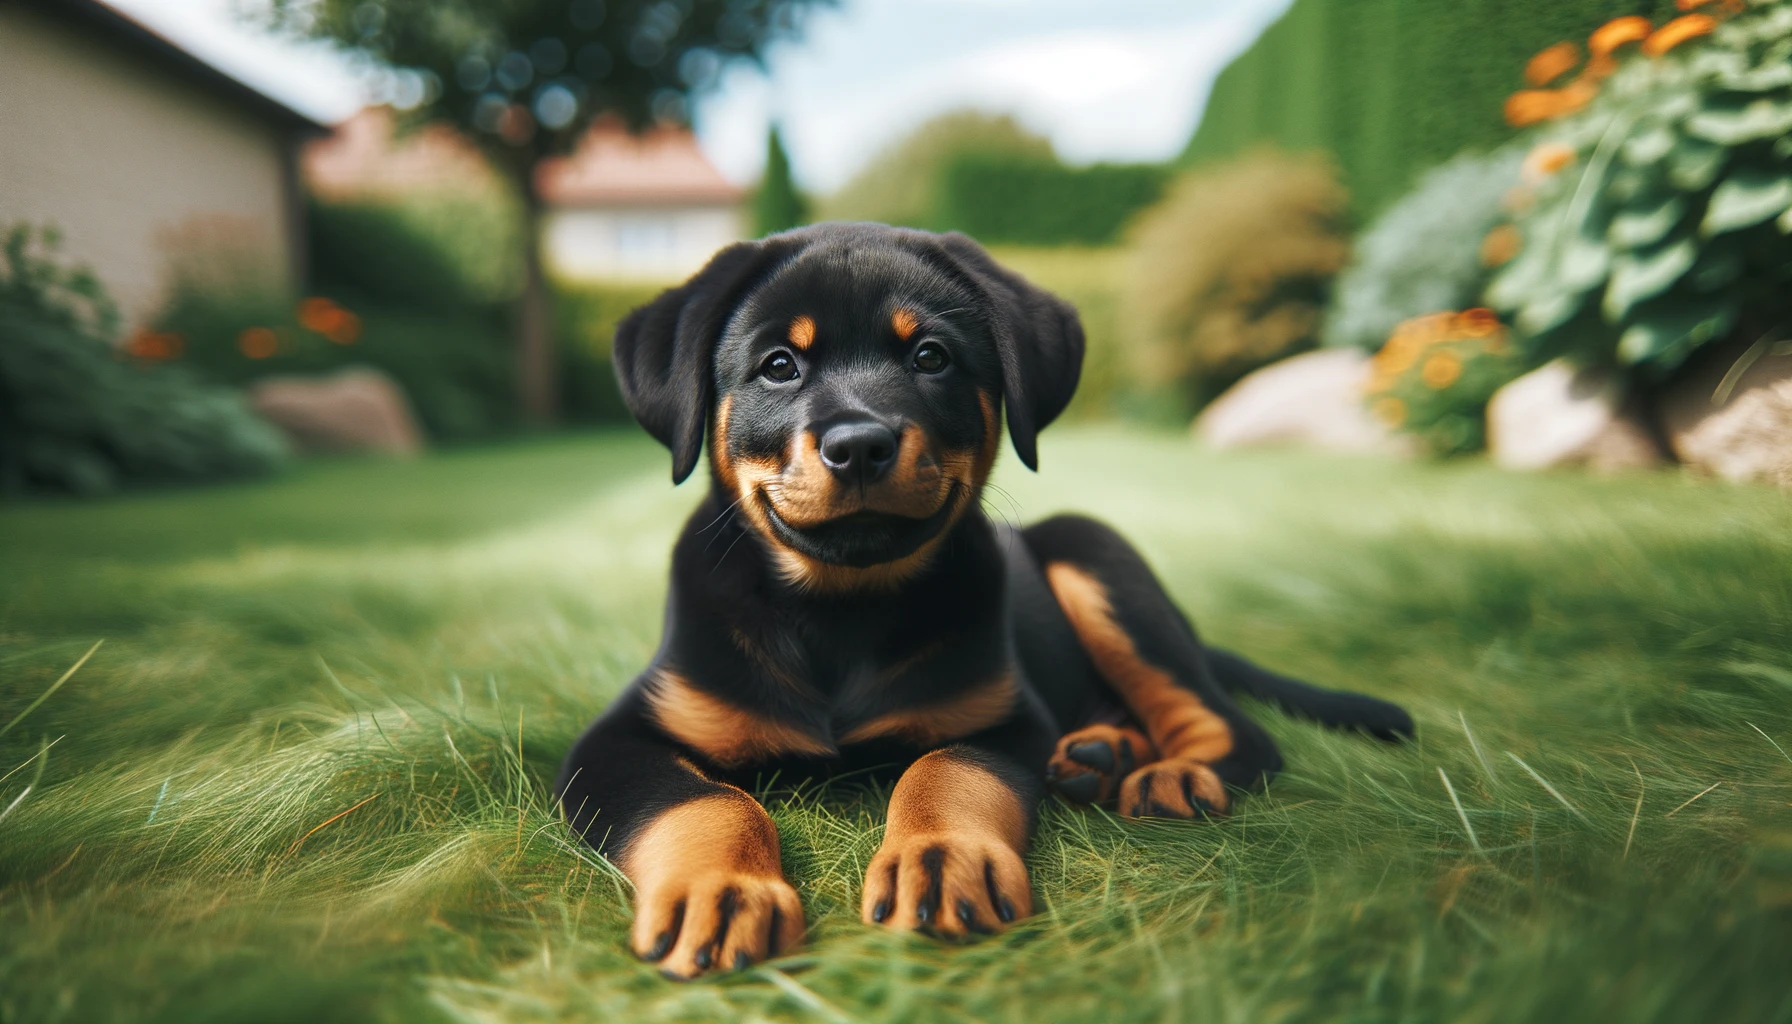 A playful Rottweiler Lab Mix Puppy lounging in the grass.